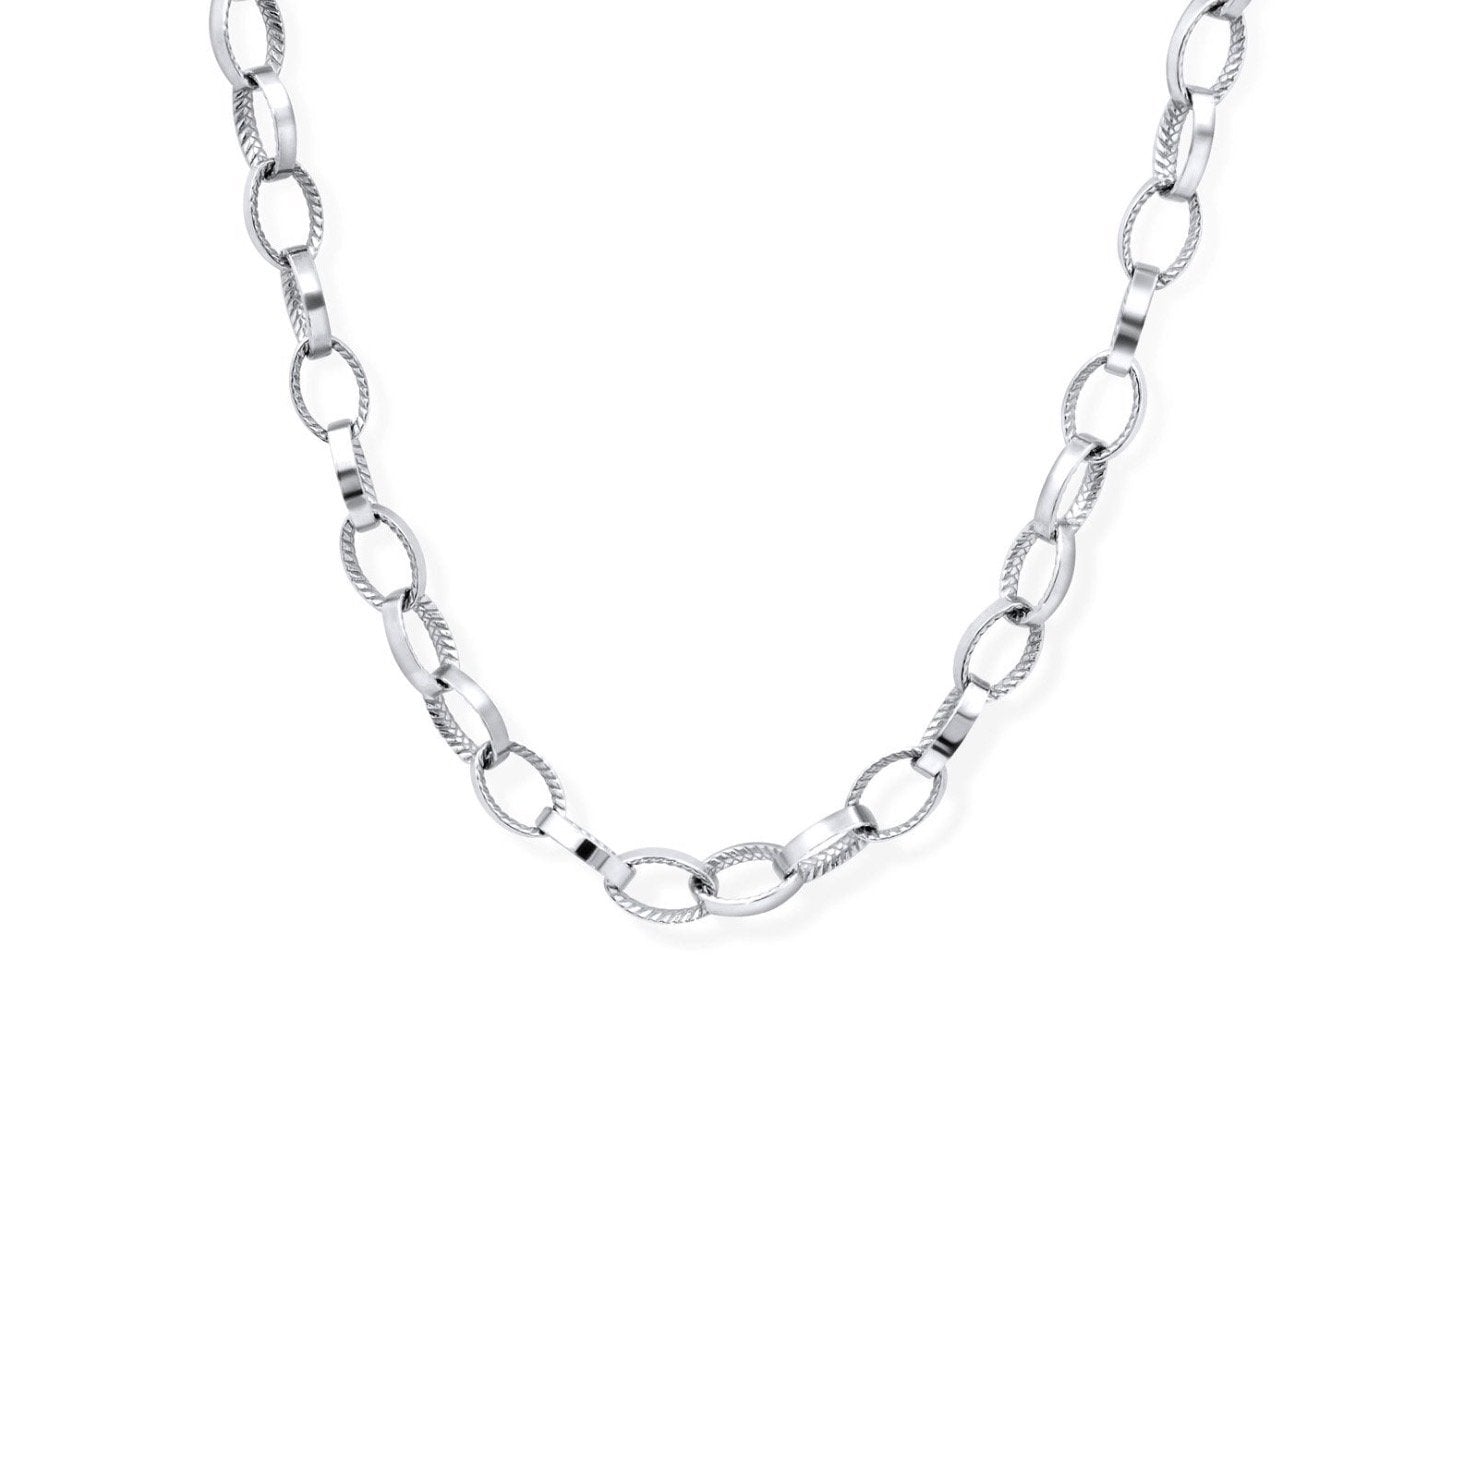 Silver Link Necklace On White Background - Camille Jewelry